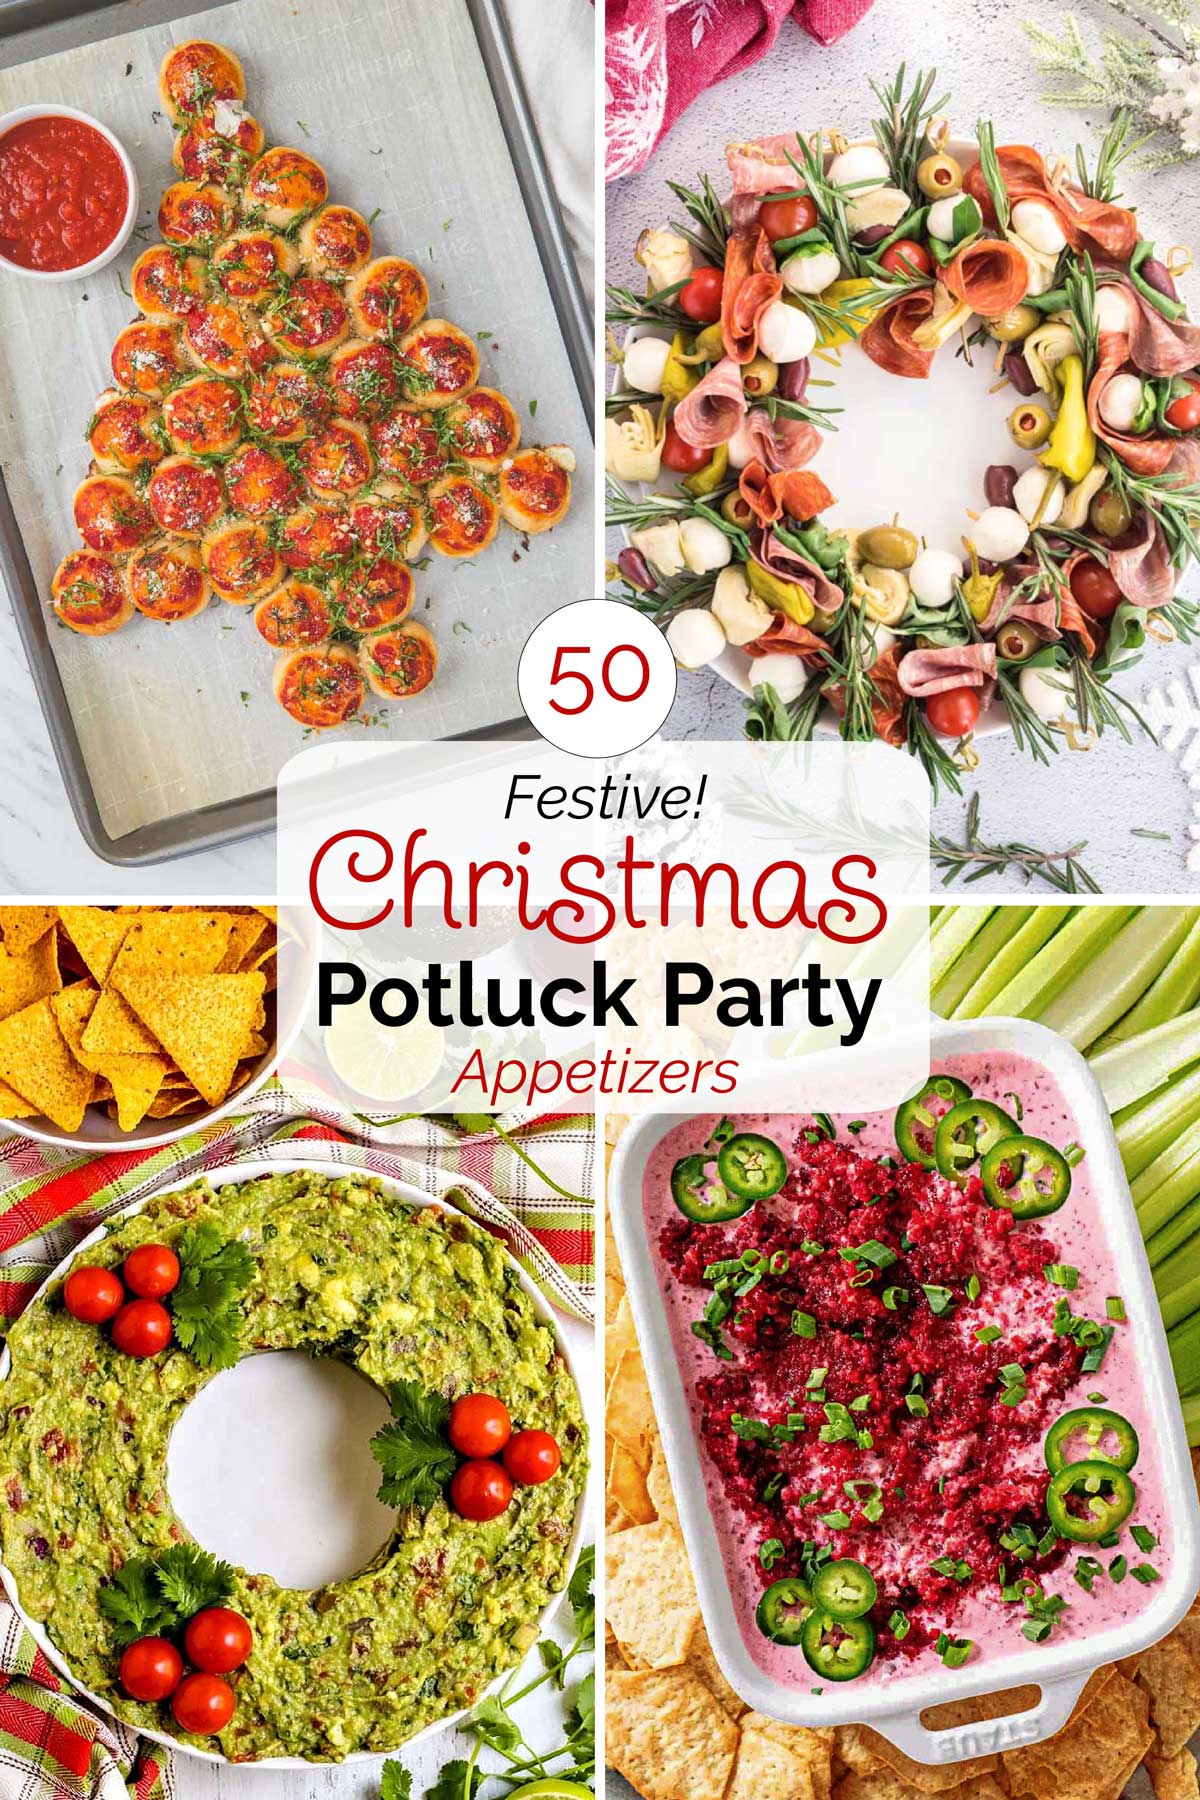 Collage of 4 recipe photos with text overlay "50 Festive! Christmas Potluck Party Appetizers".